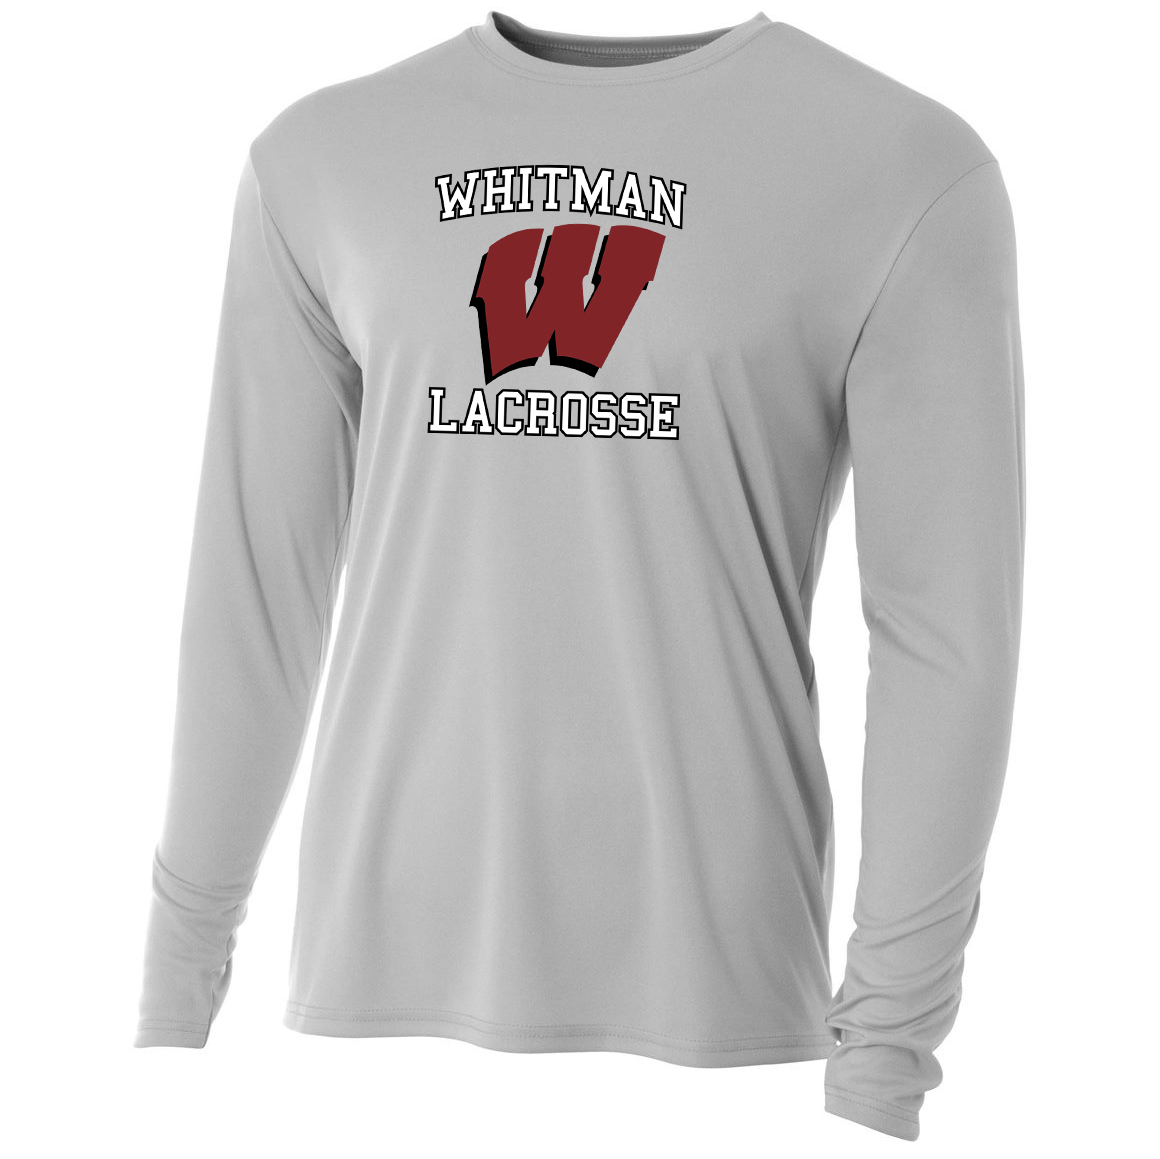 Whitman Lacrosse A4 Cooling Performance L/S Crew